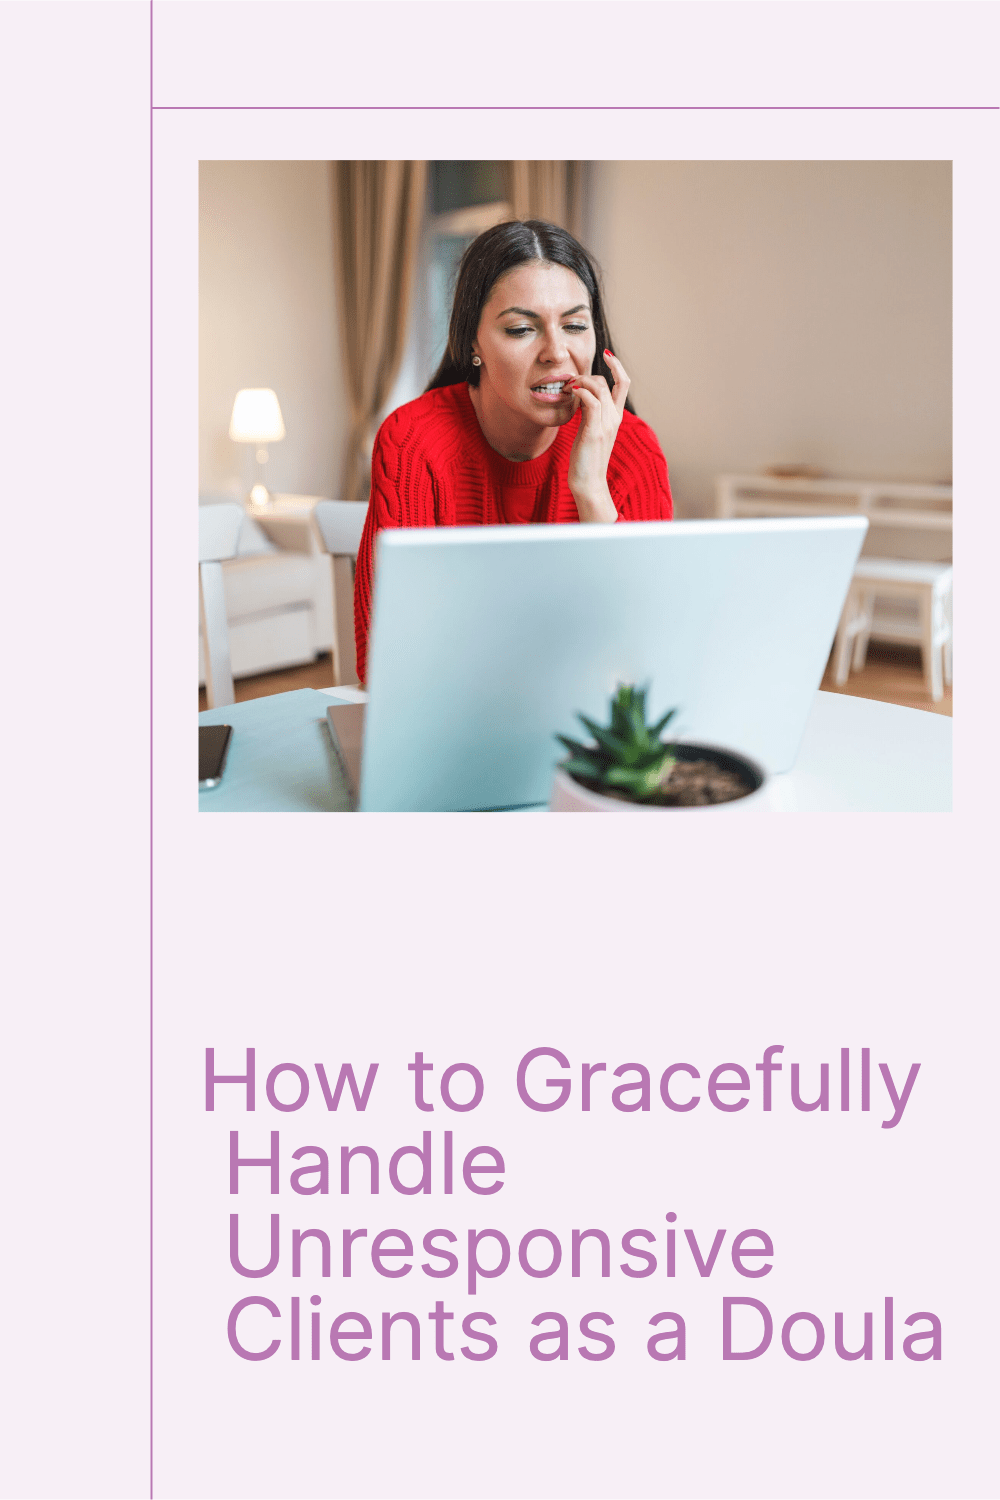 Gracefully, Unresponsive Clients